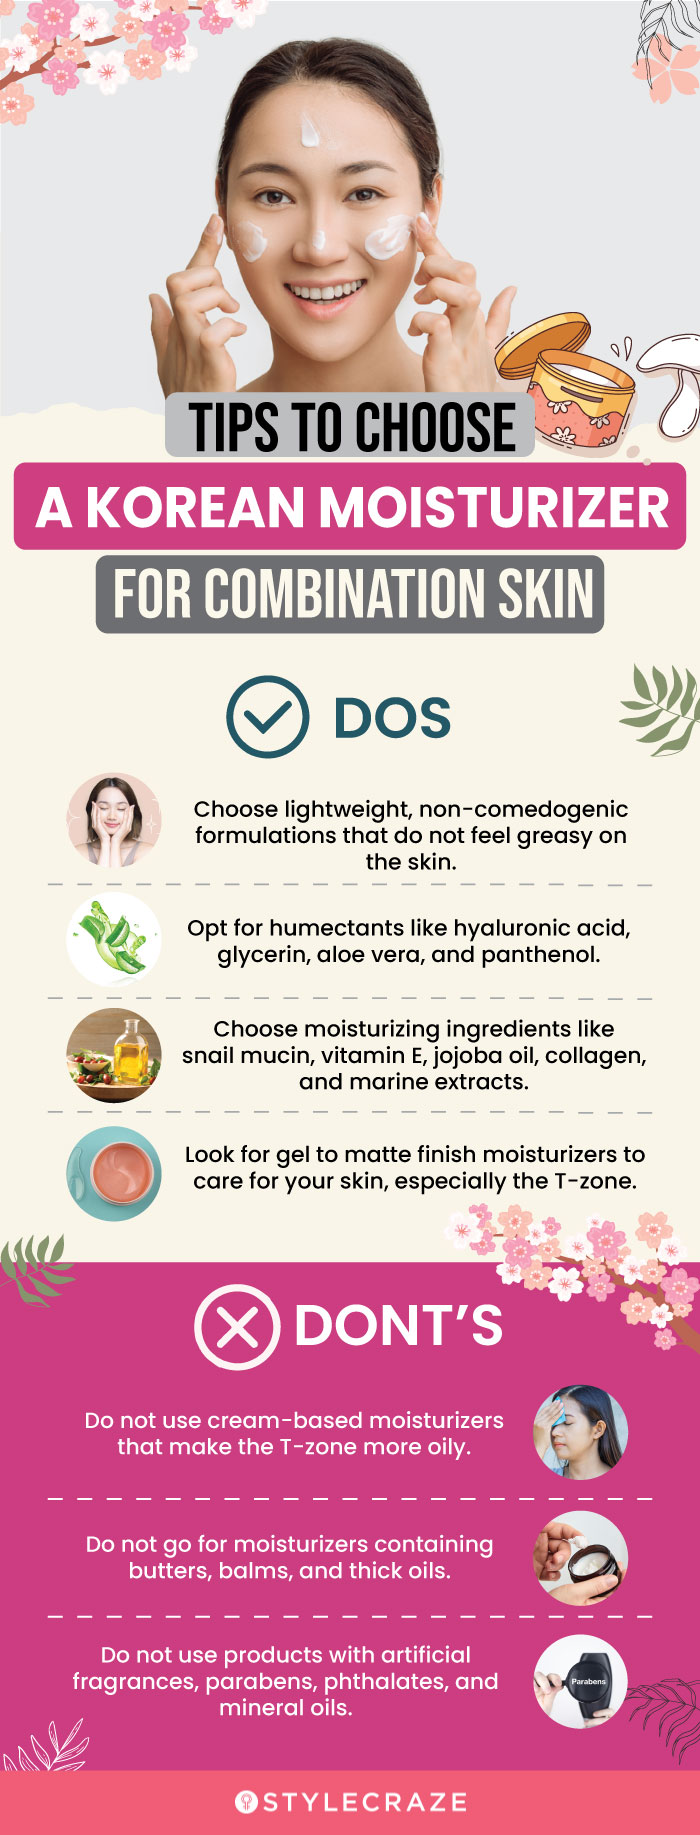 Tips To Choose A Moisturizer For Combination Skin (infographic)